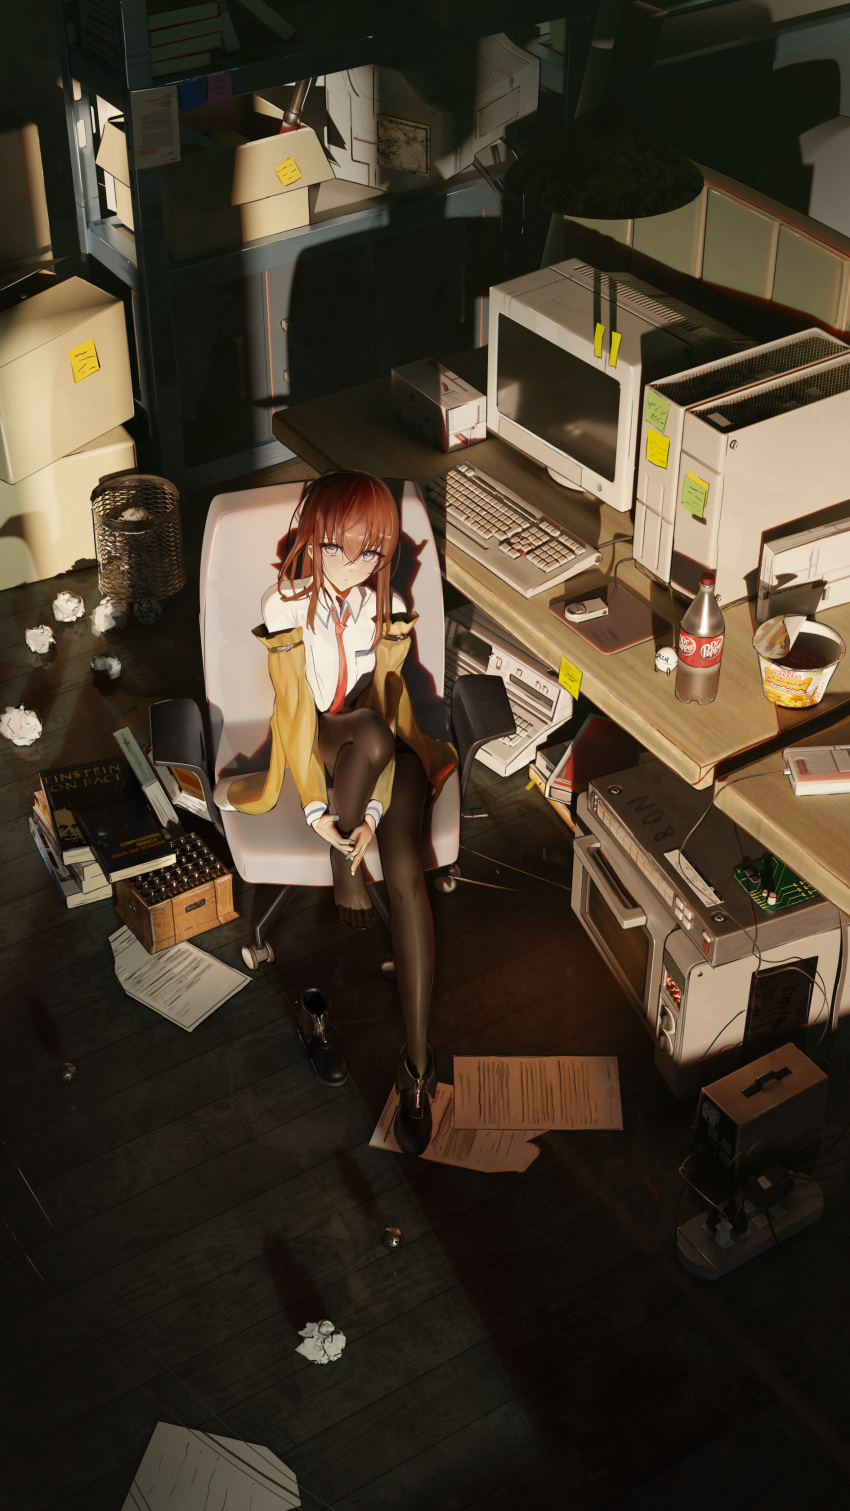 1girl absurdres black_footwear black_pantyhose book book_stack brown_hair brown_jacket chair circuit_board collared_shirt computer crt crumpled_paper cup_ramen desk dr_pepper from_above full_body highres ibn5100 indoors jacket keyboard_(computer) koishi_(hibananana) leg_up long_hair long_sleeves looking_at_viewer looking_up makise_kurisu microwave monitor mouse_(computer) office_chair on_chair pantyhose red_tie shadow shelf shirt shoes single_shoe sitting solo steins;gate swivel_chair trash_can white_shirt wide_shot x68000